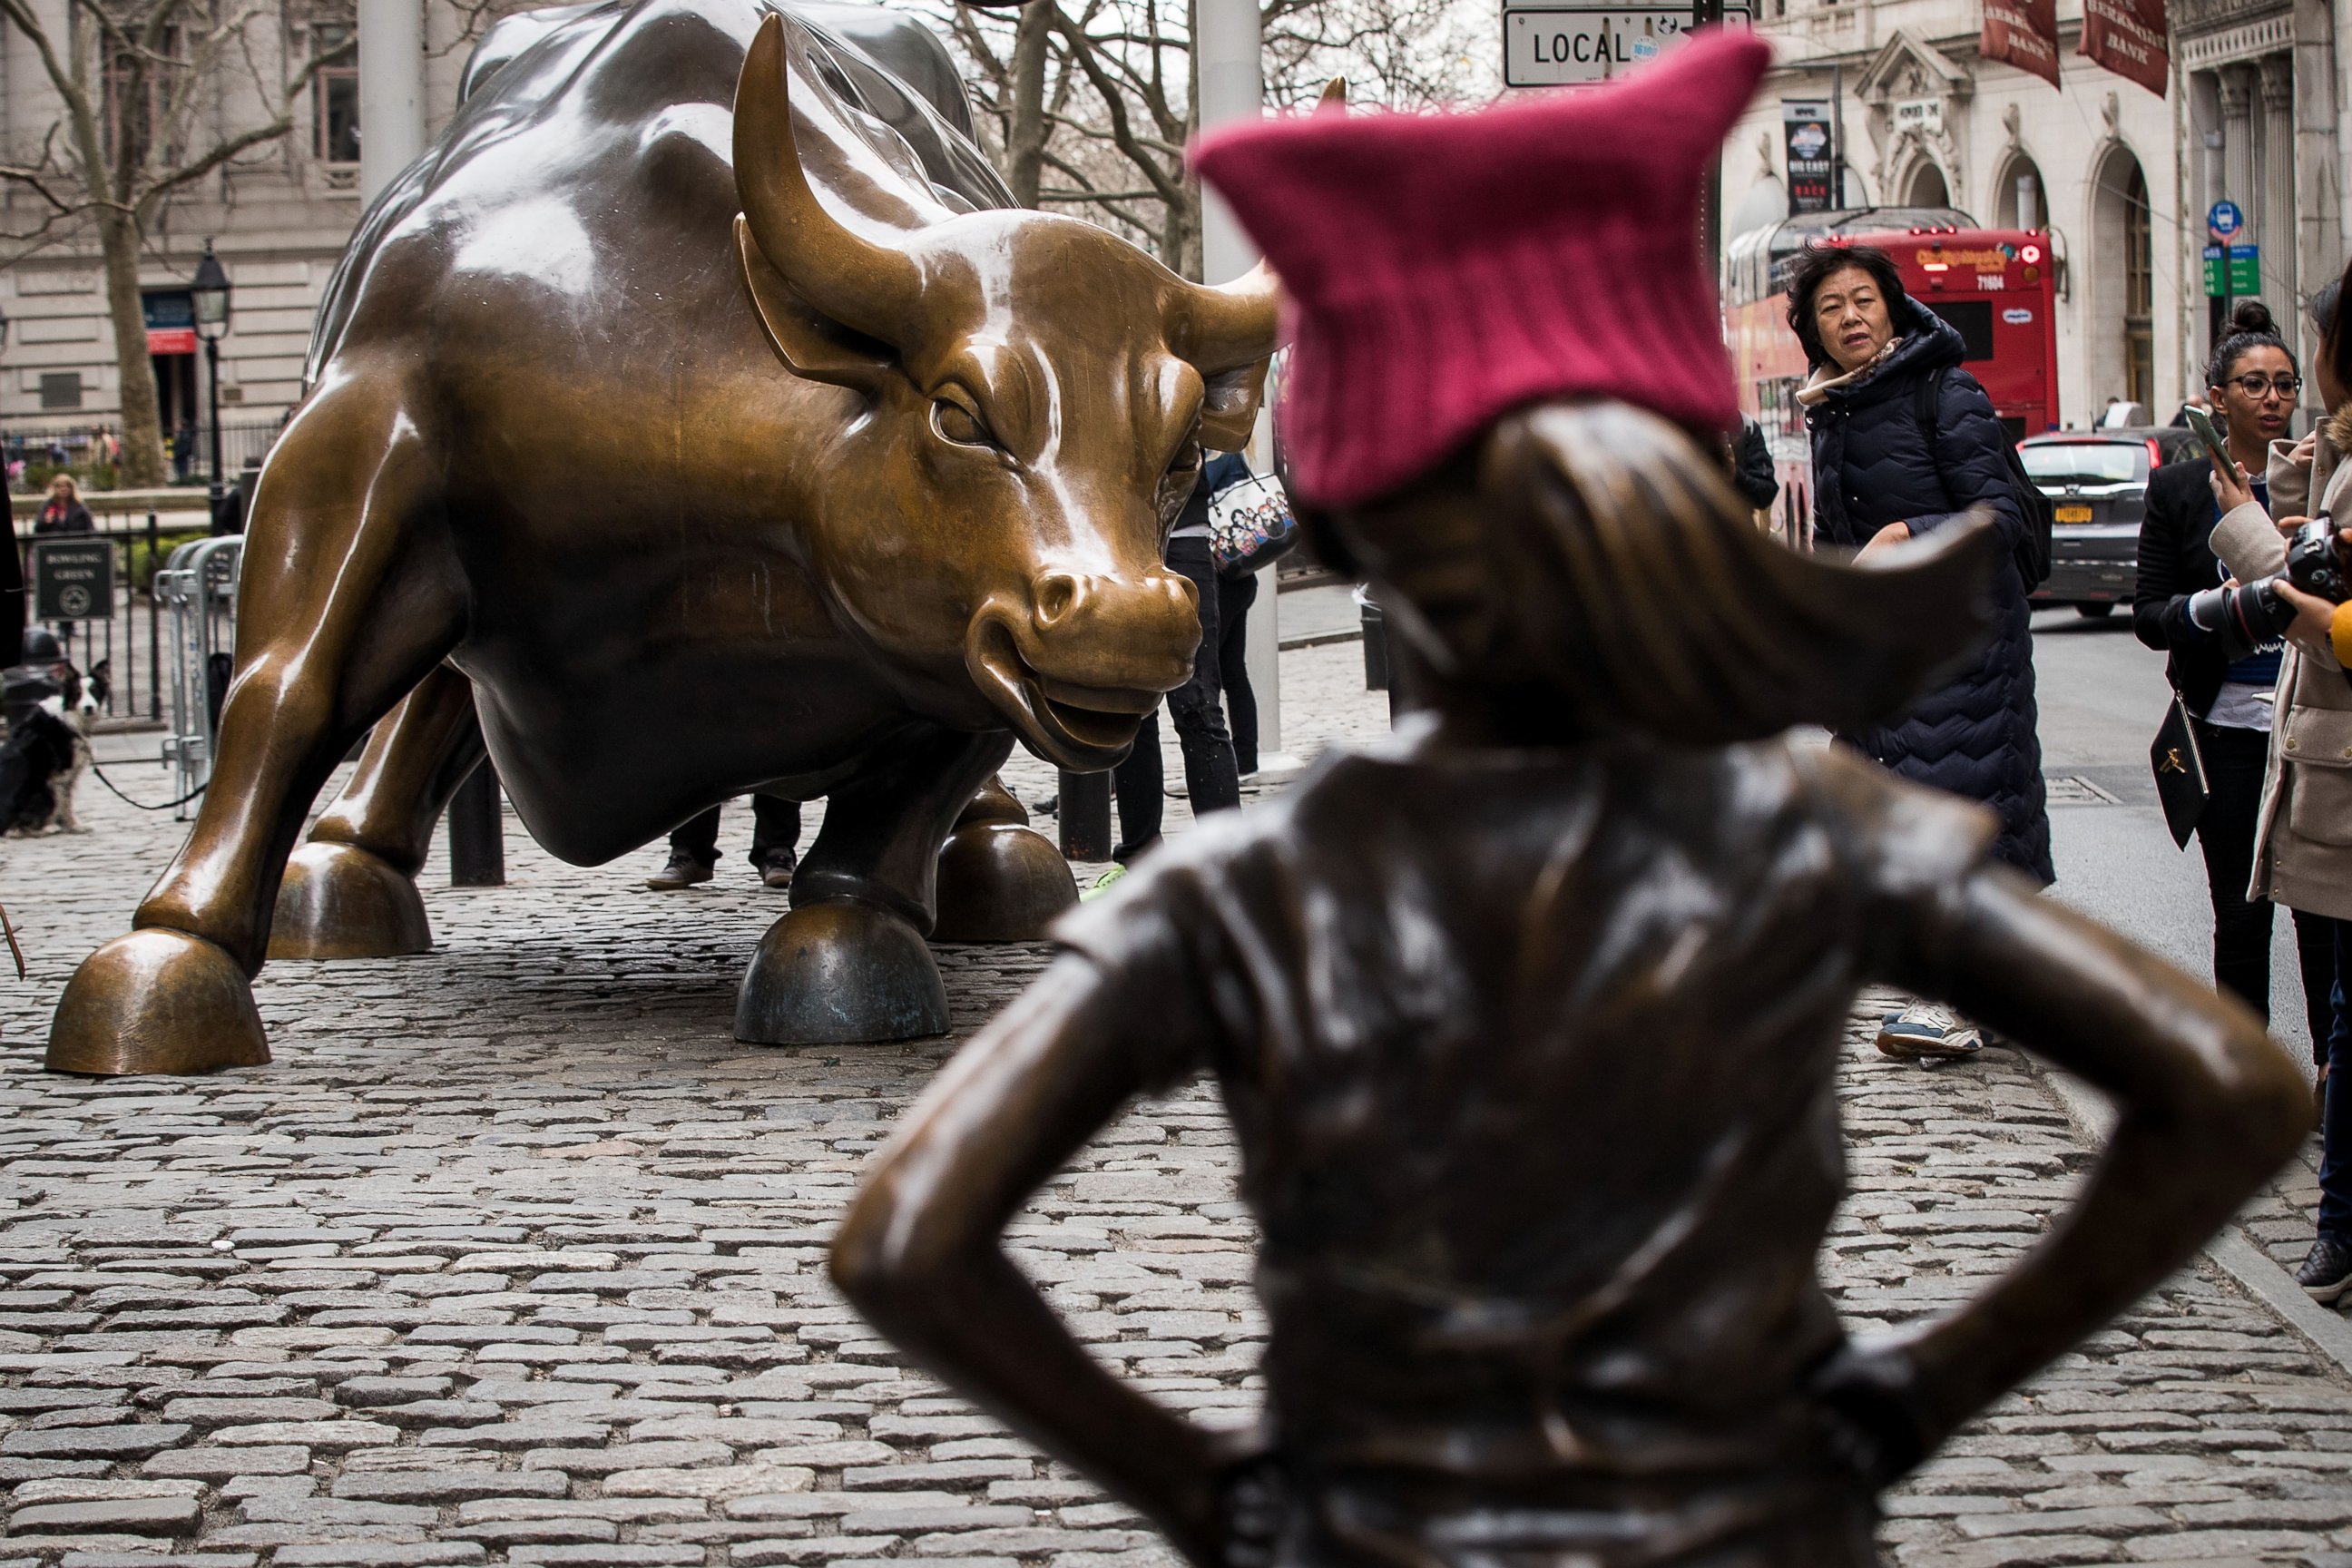 PHOTO: 'The Fearless Girl' statues stands across from the iconic Wall Street charging bull statue, March 8, 2017, in New York.